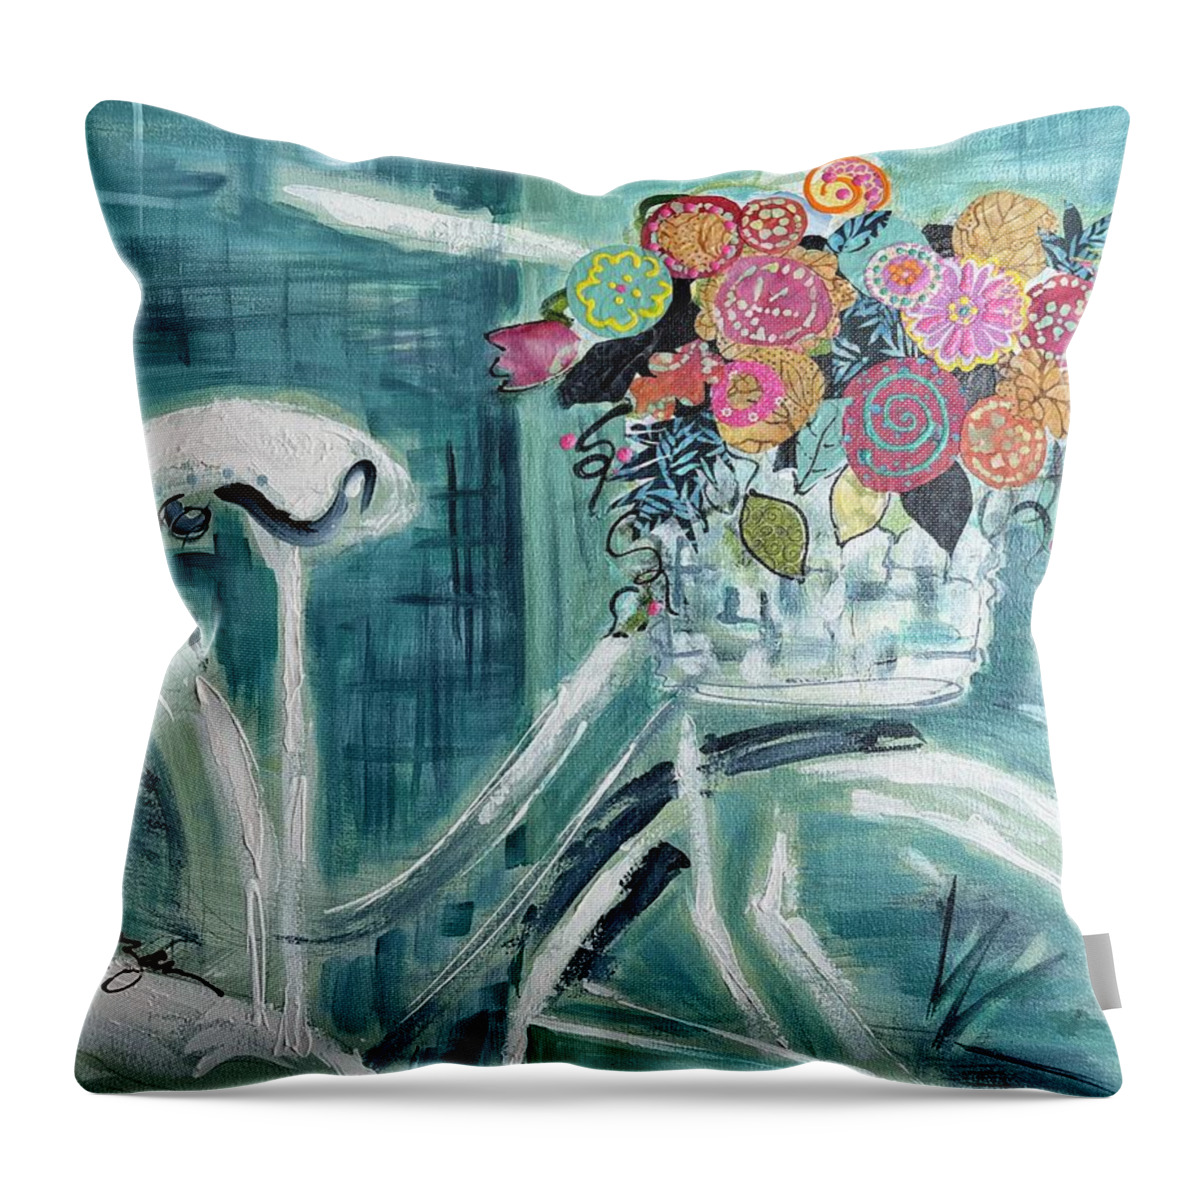  Throw Pillow featuring the painting Ghost Rider by Judy Rogan